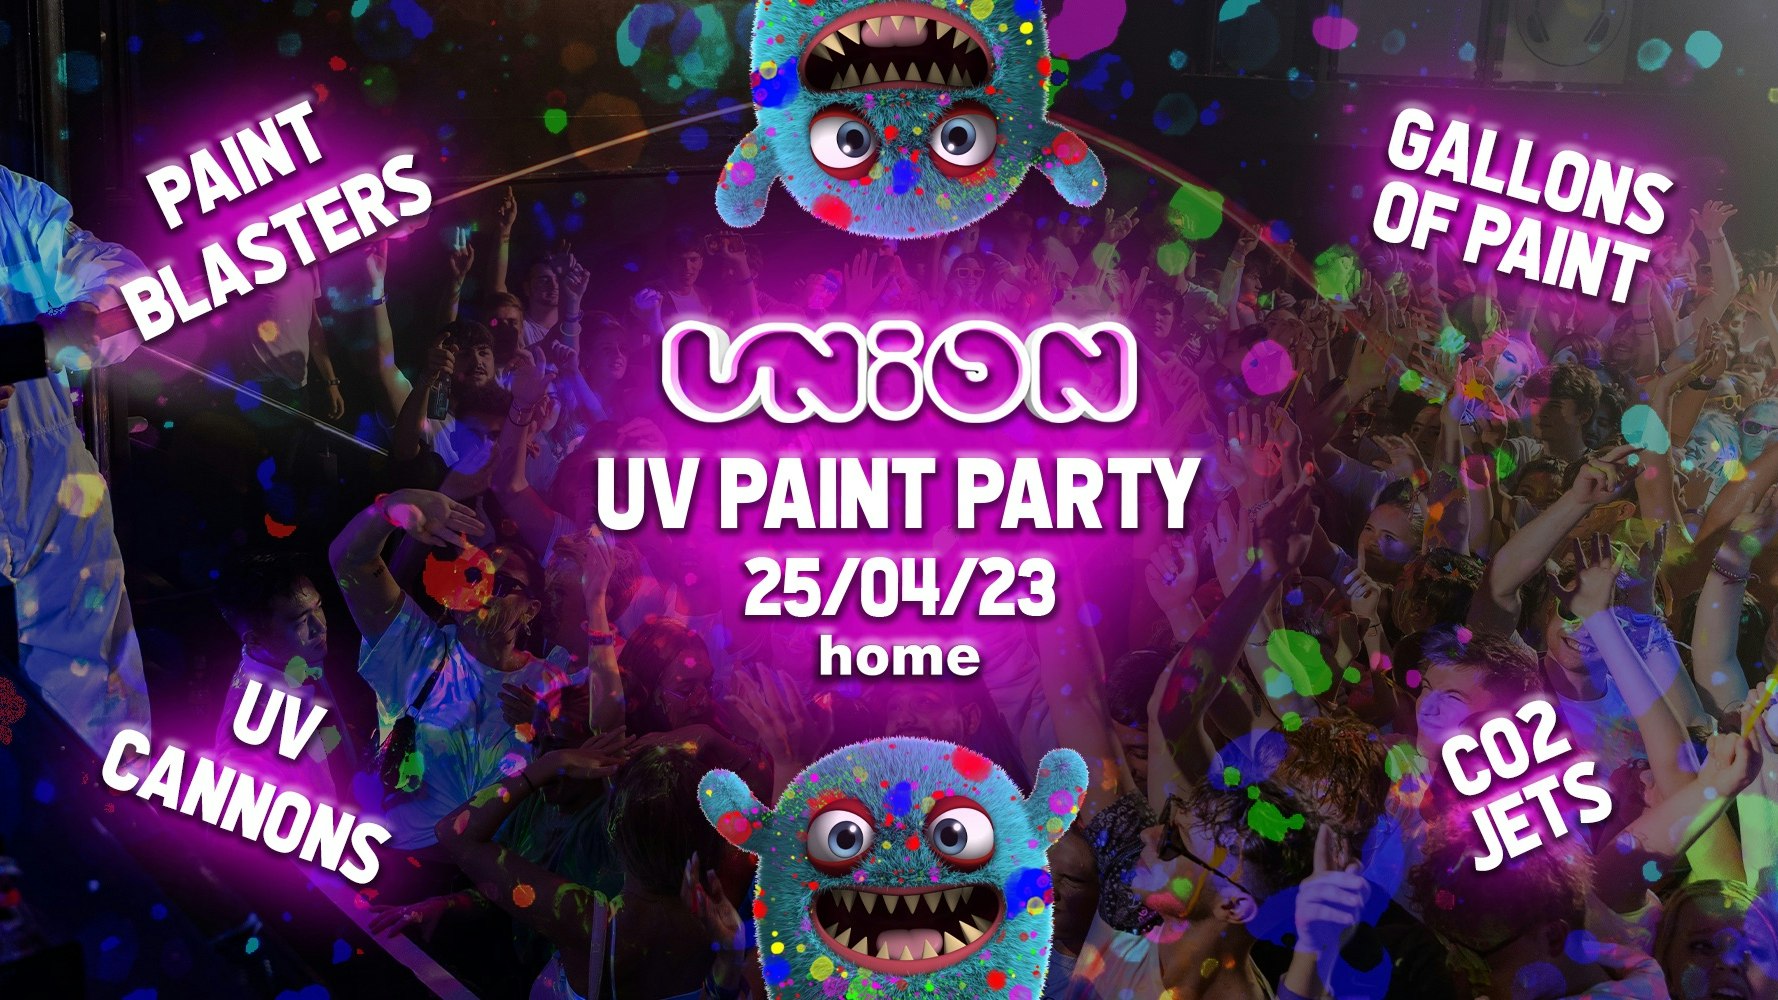 UNION TUESDAY’S AT HOME | THE UV PAINT PARTY!